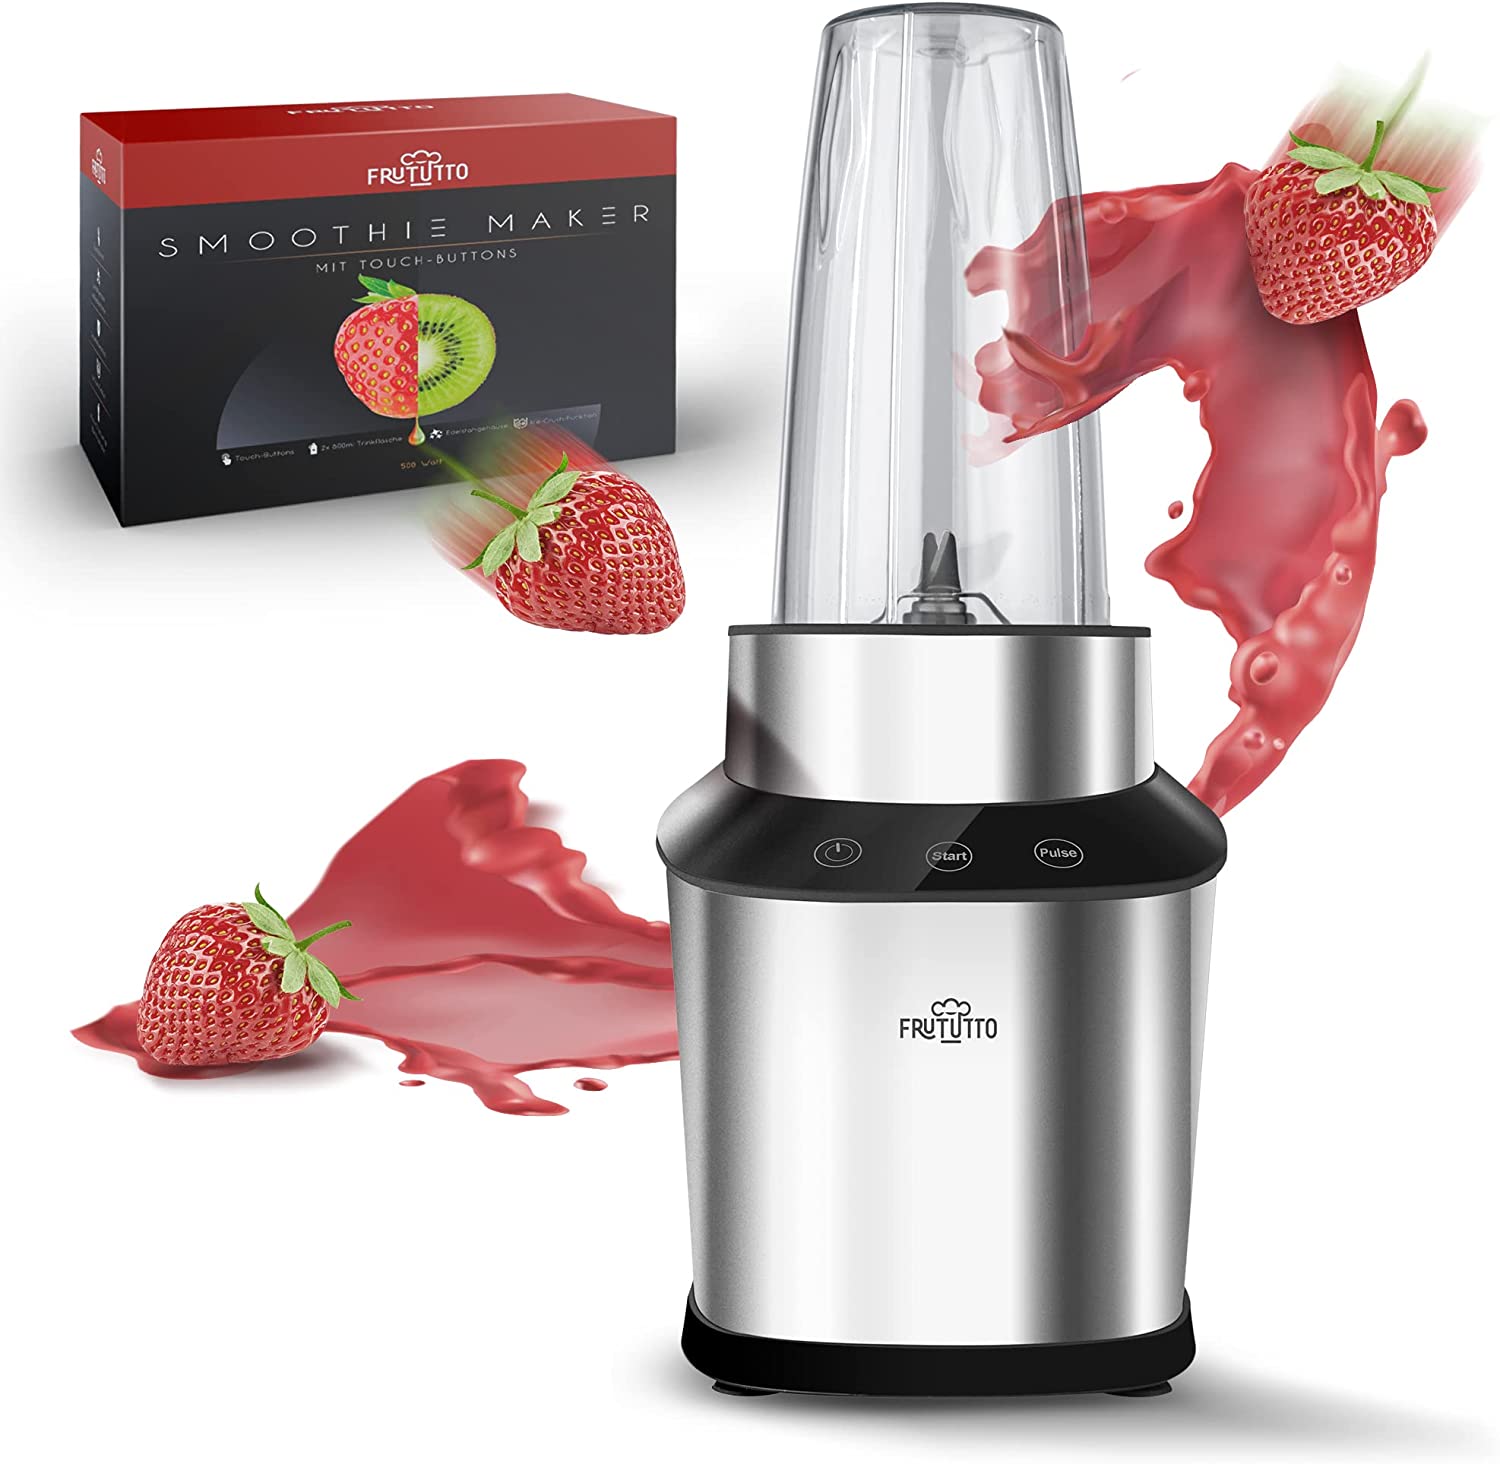 FRUTUTTO Smoothie Maker - Stand Mixer to Go - 2 x 800 ml Mixing Containers / Drinking Bottles - Lid with Carry Handle - Ultra Strong Stainless Steel Knife - Ice-Crush Function and Touch Operation - 500 Watt Blender Mixer